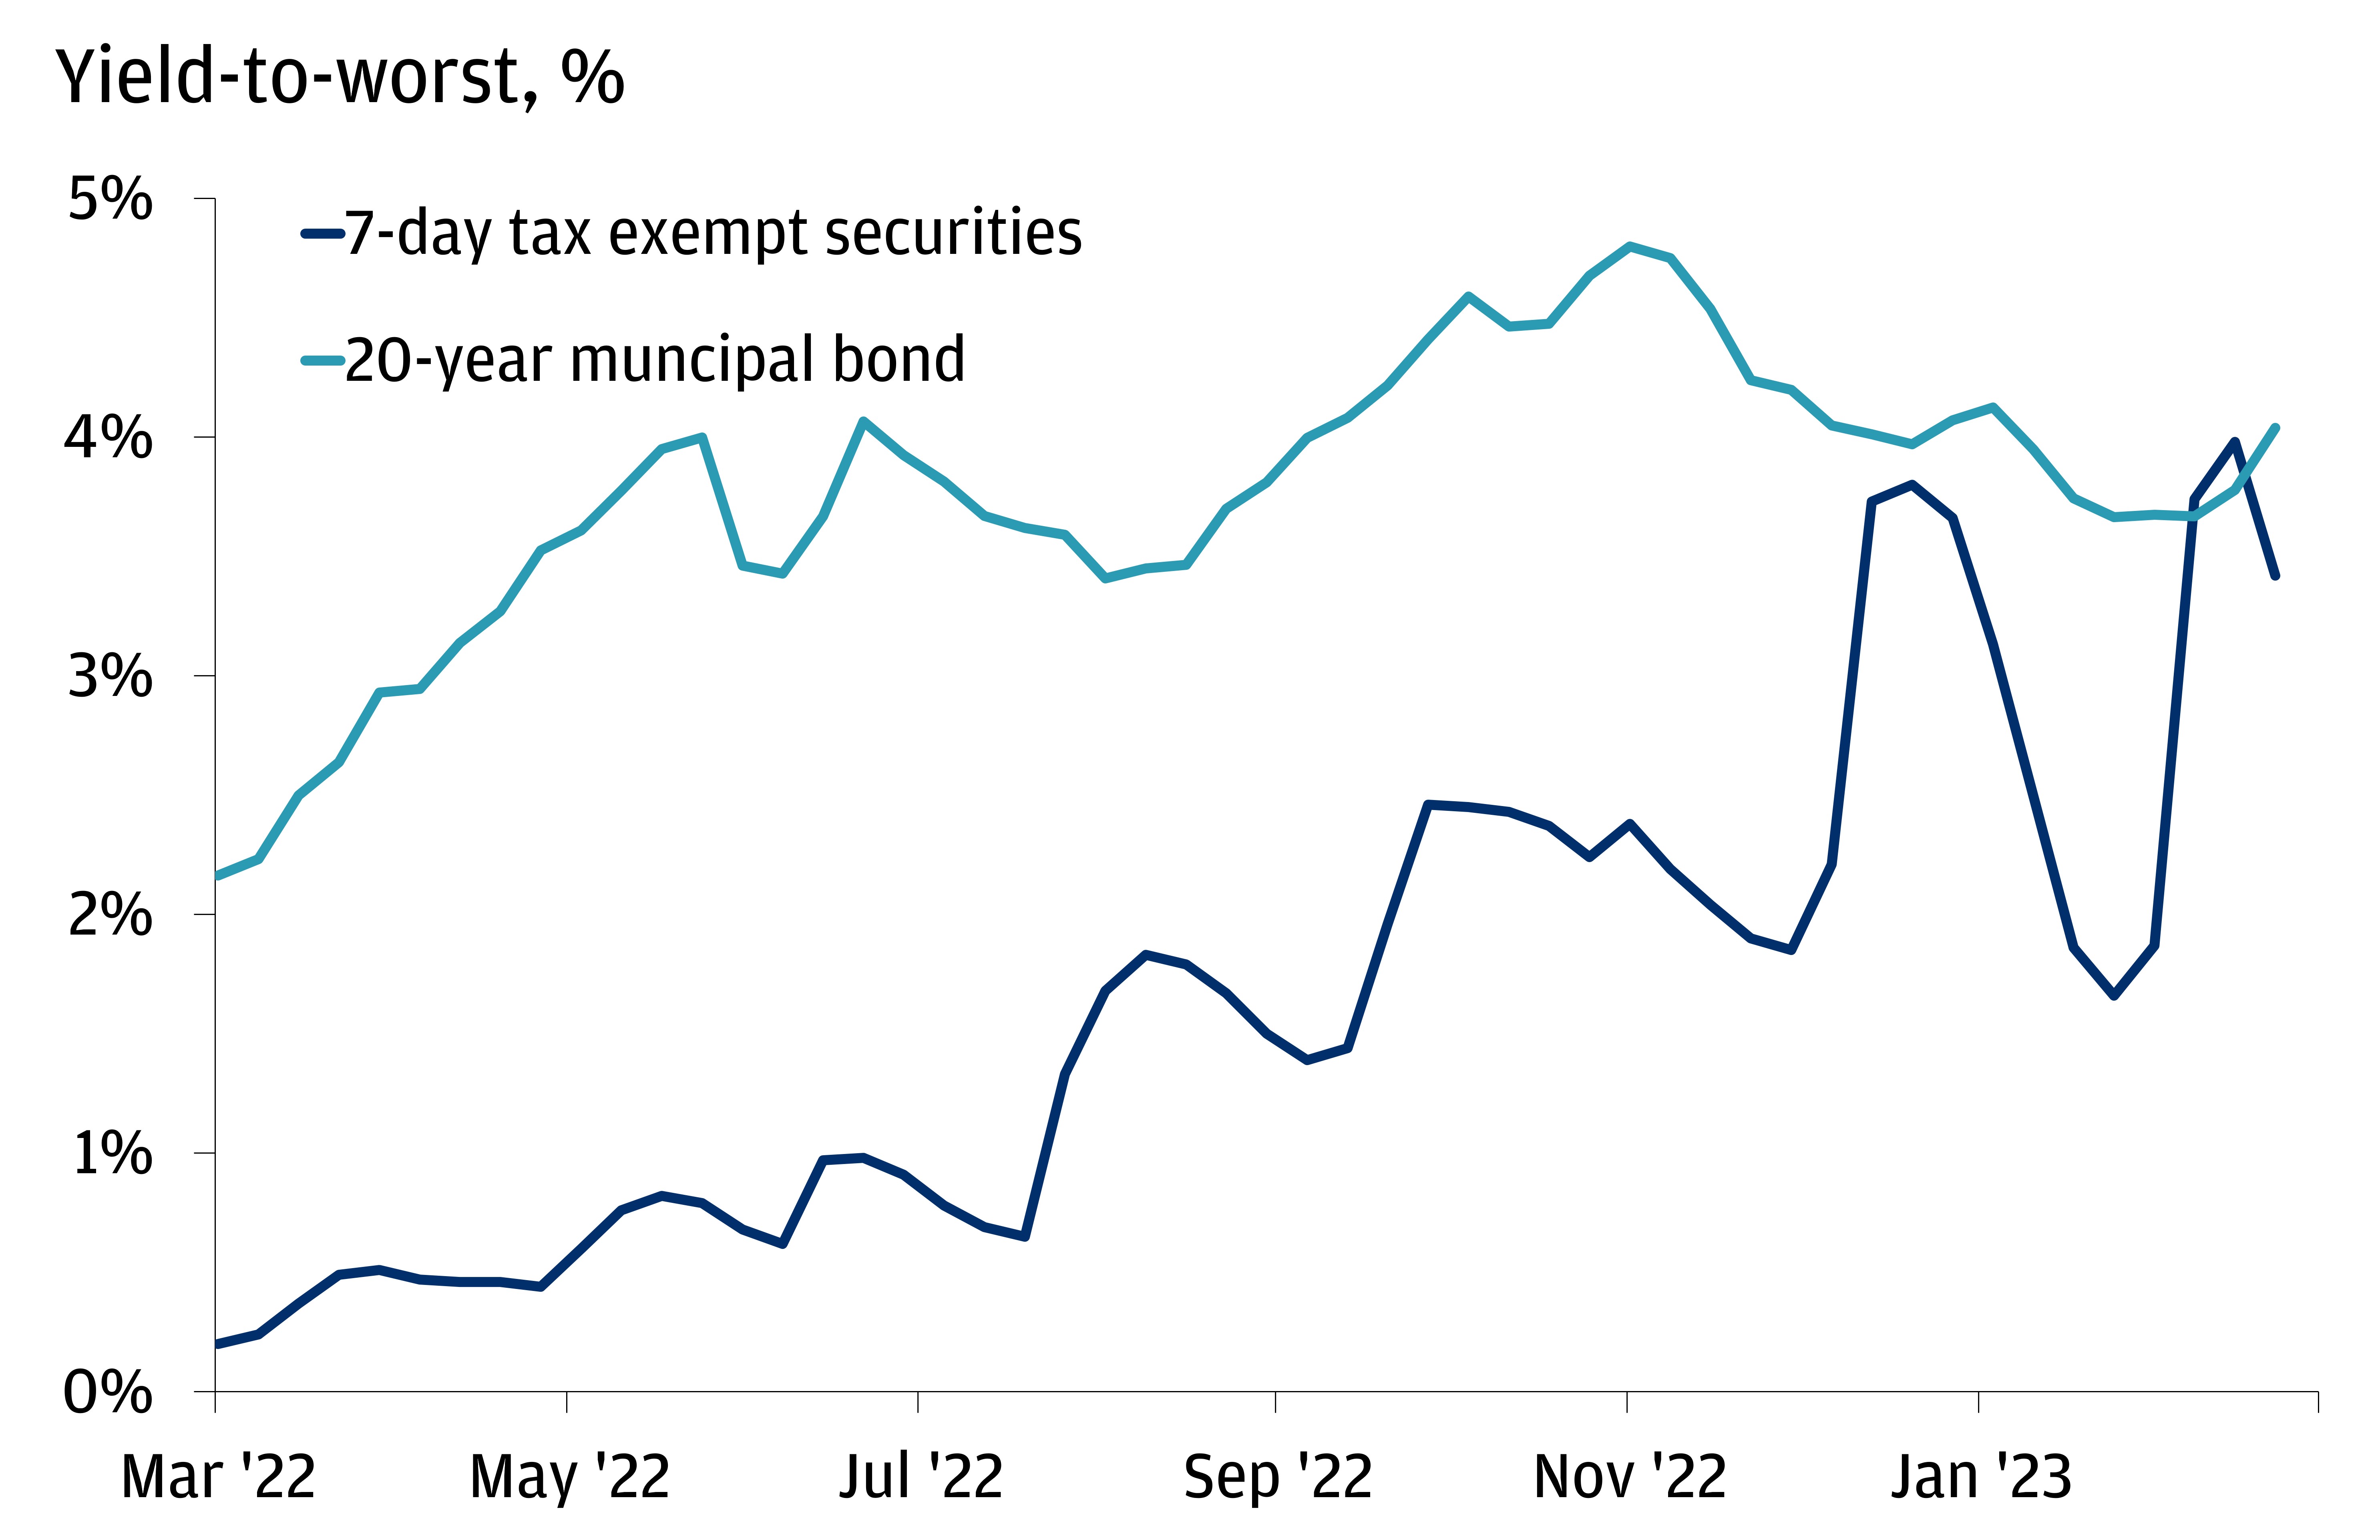 This line chart shows the yield-to-worst for 7-day tax-exempt securities and 20-year municipal bonds from March 2022 to February 2023.